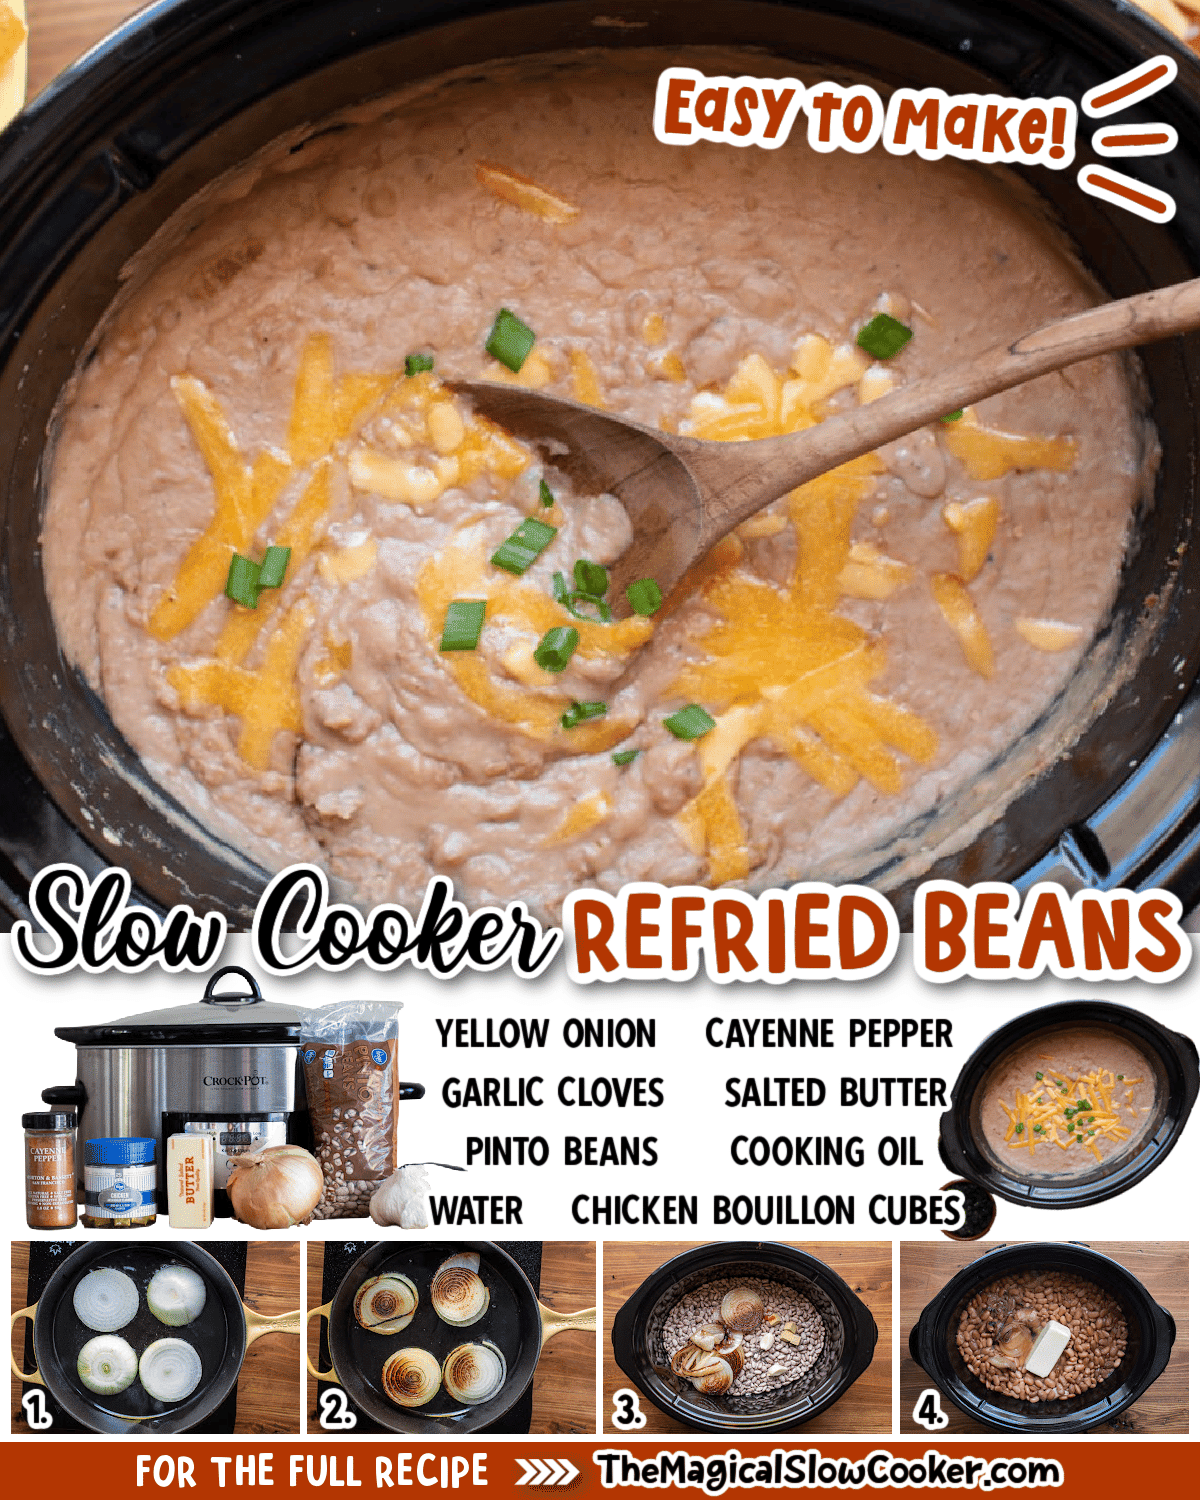 Collage of refried beans images with text of what ingredients are.